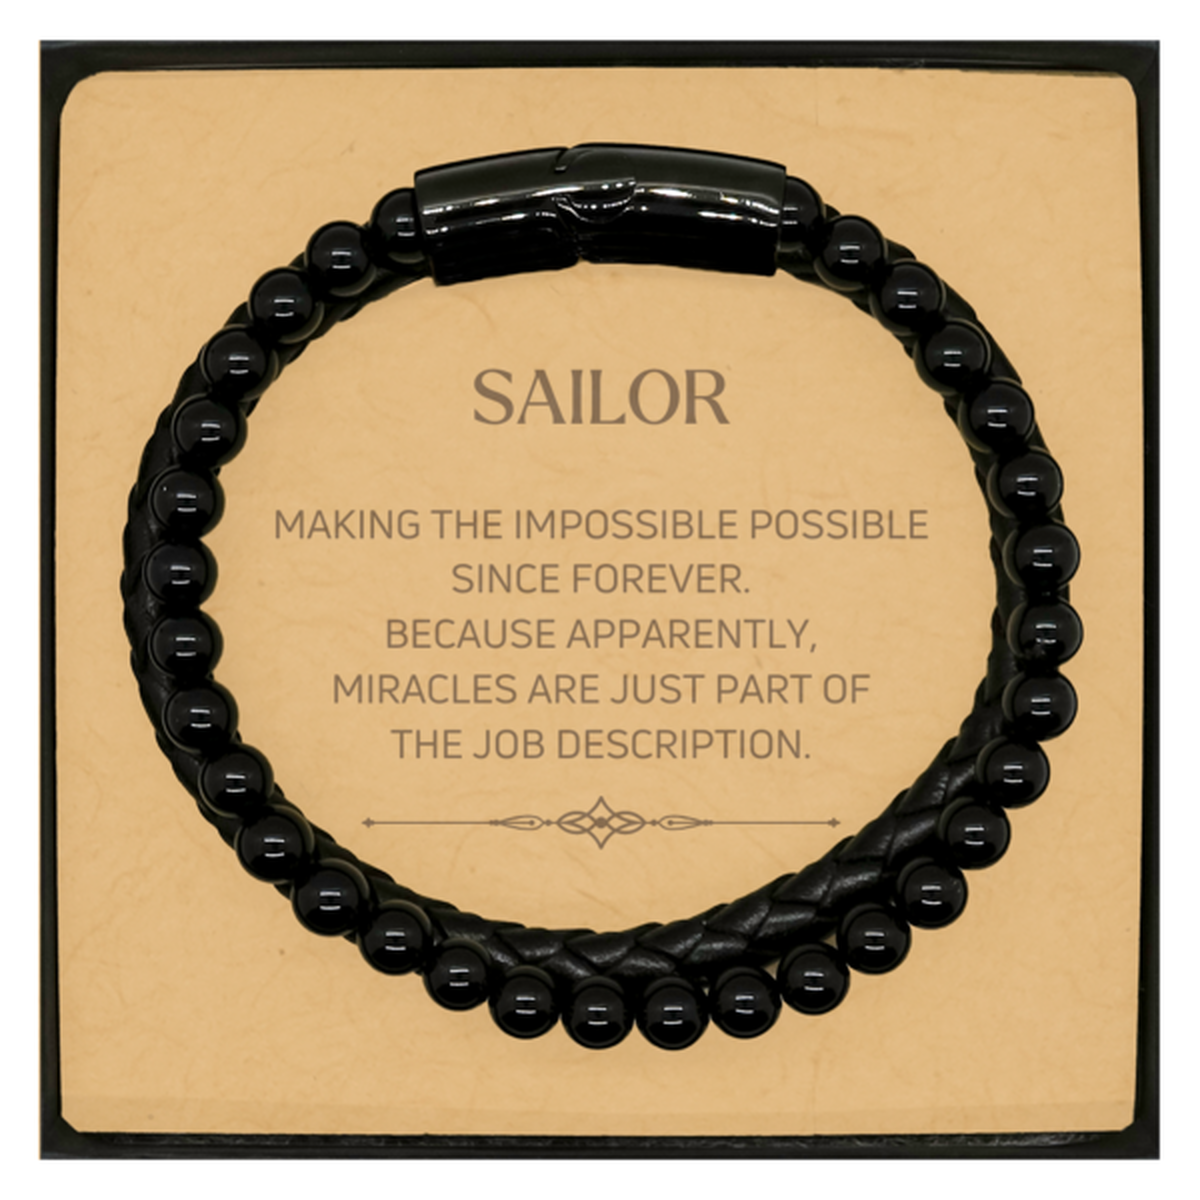 Funny Sailor Gifts, Miracles are just part of the job description, Inspirational Birthday Christmas Stone Leather Bracelets For Sailor, Men, Women, Coworkers, Friends, Boss